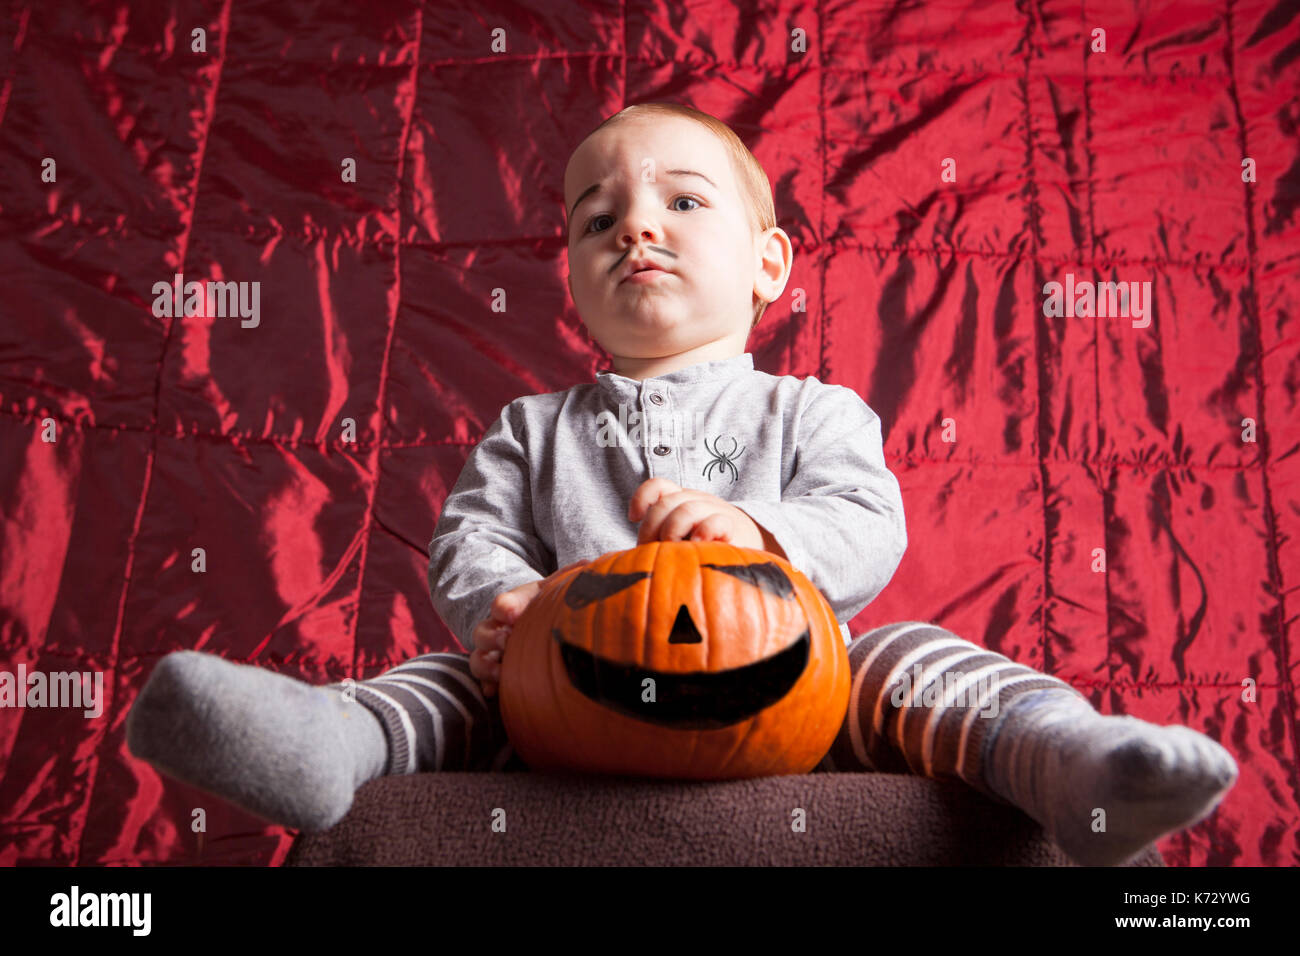 Portrait of a little boy dress up for halloween party. He has a serious suspecting expression Stock Photo